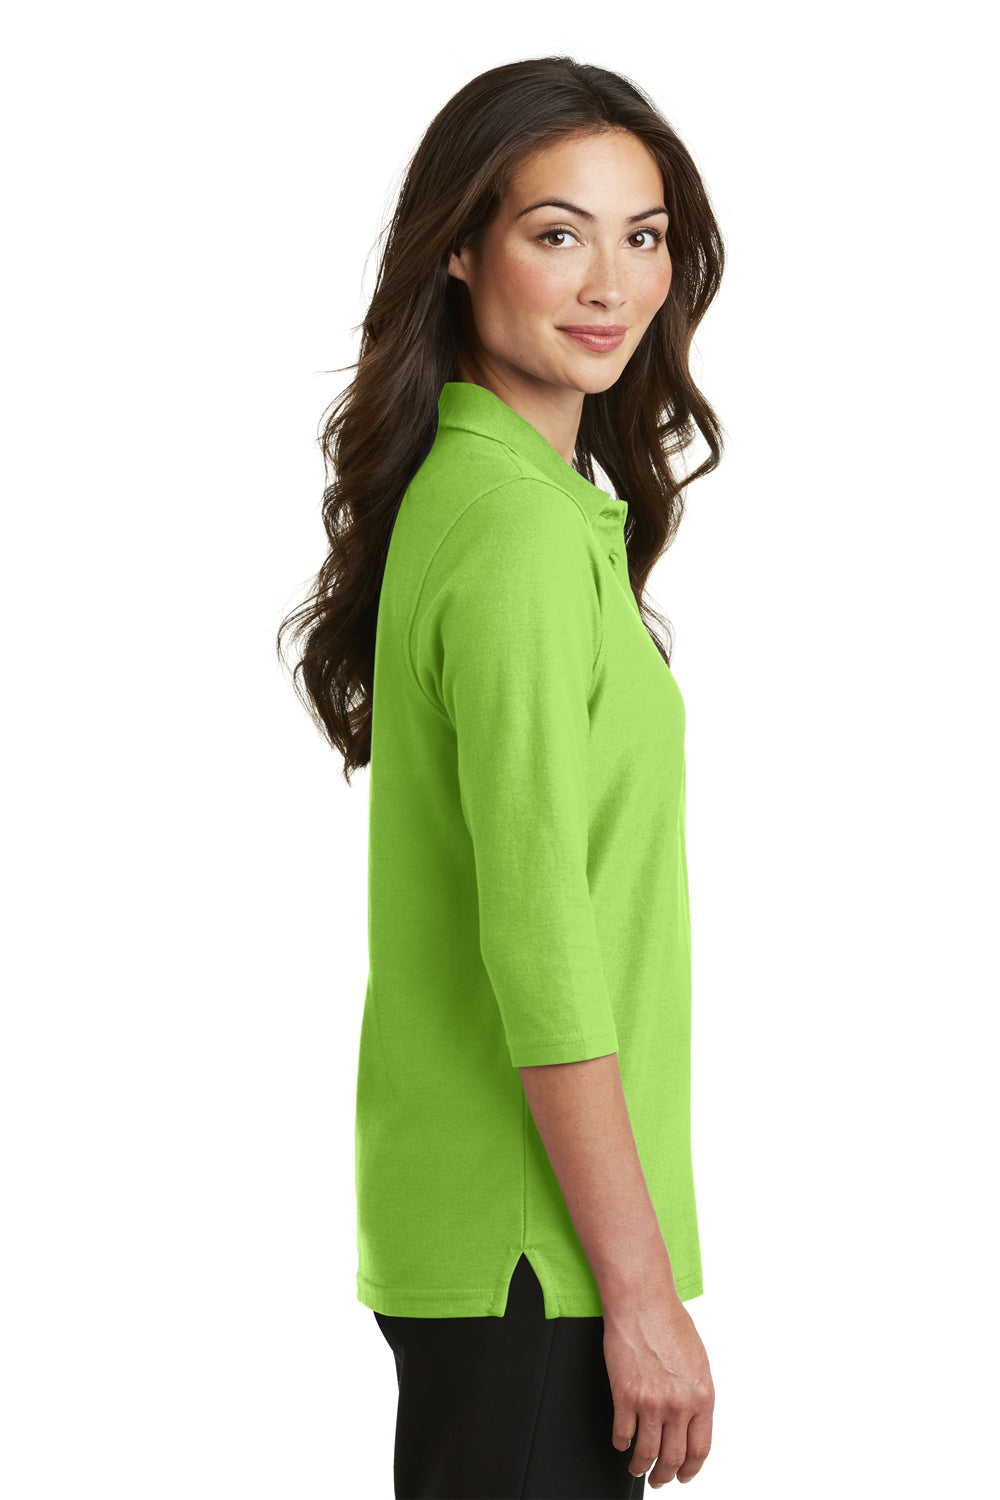 Port Authority L562 Womens Silk Touch 3/4 Sleeve Polo Shirt Lime Green Side